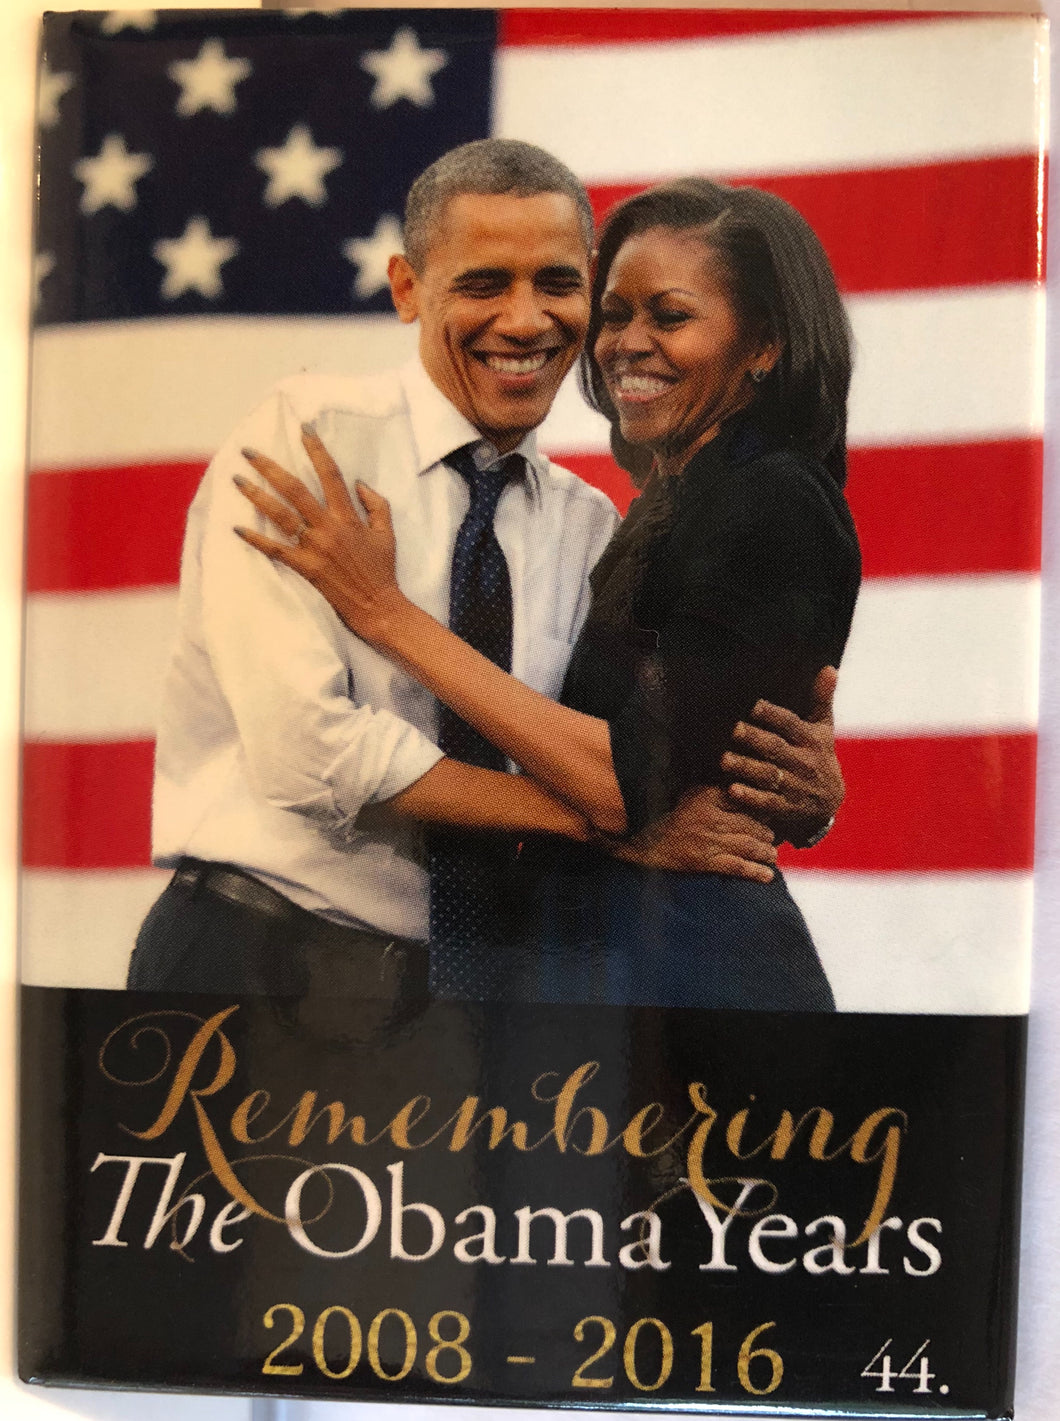 Remembering the Obama Years 2008-2016 Magnet